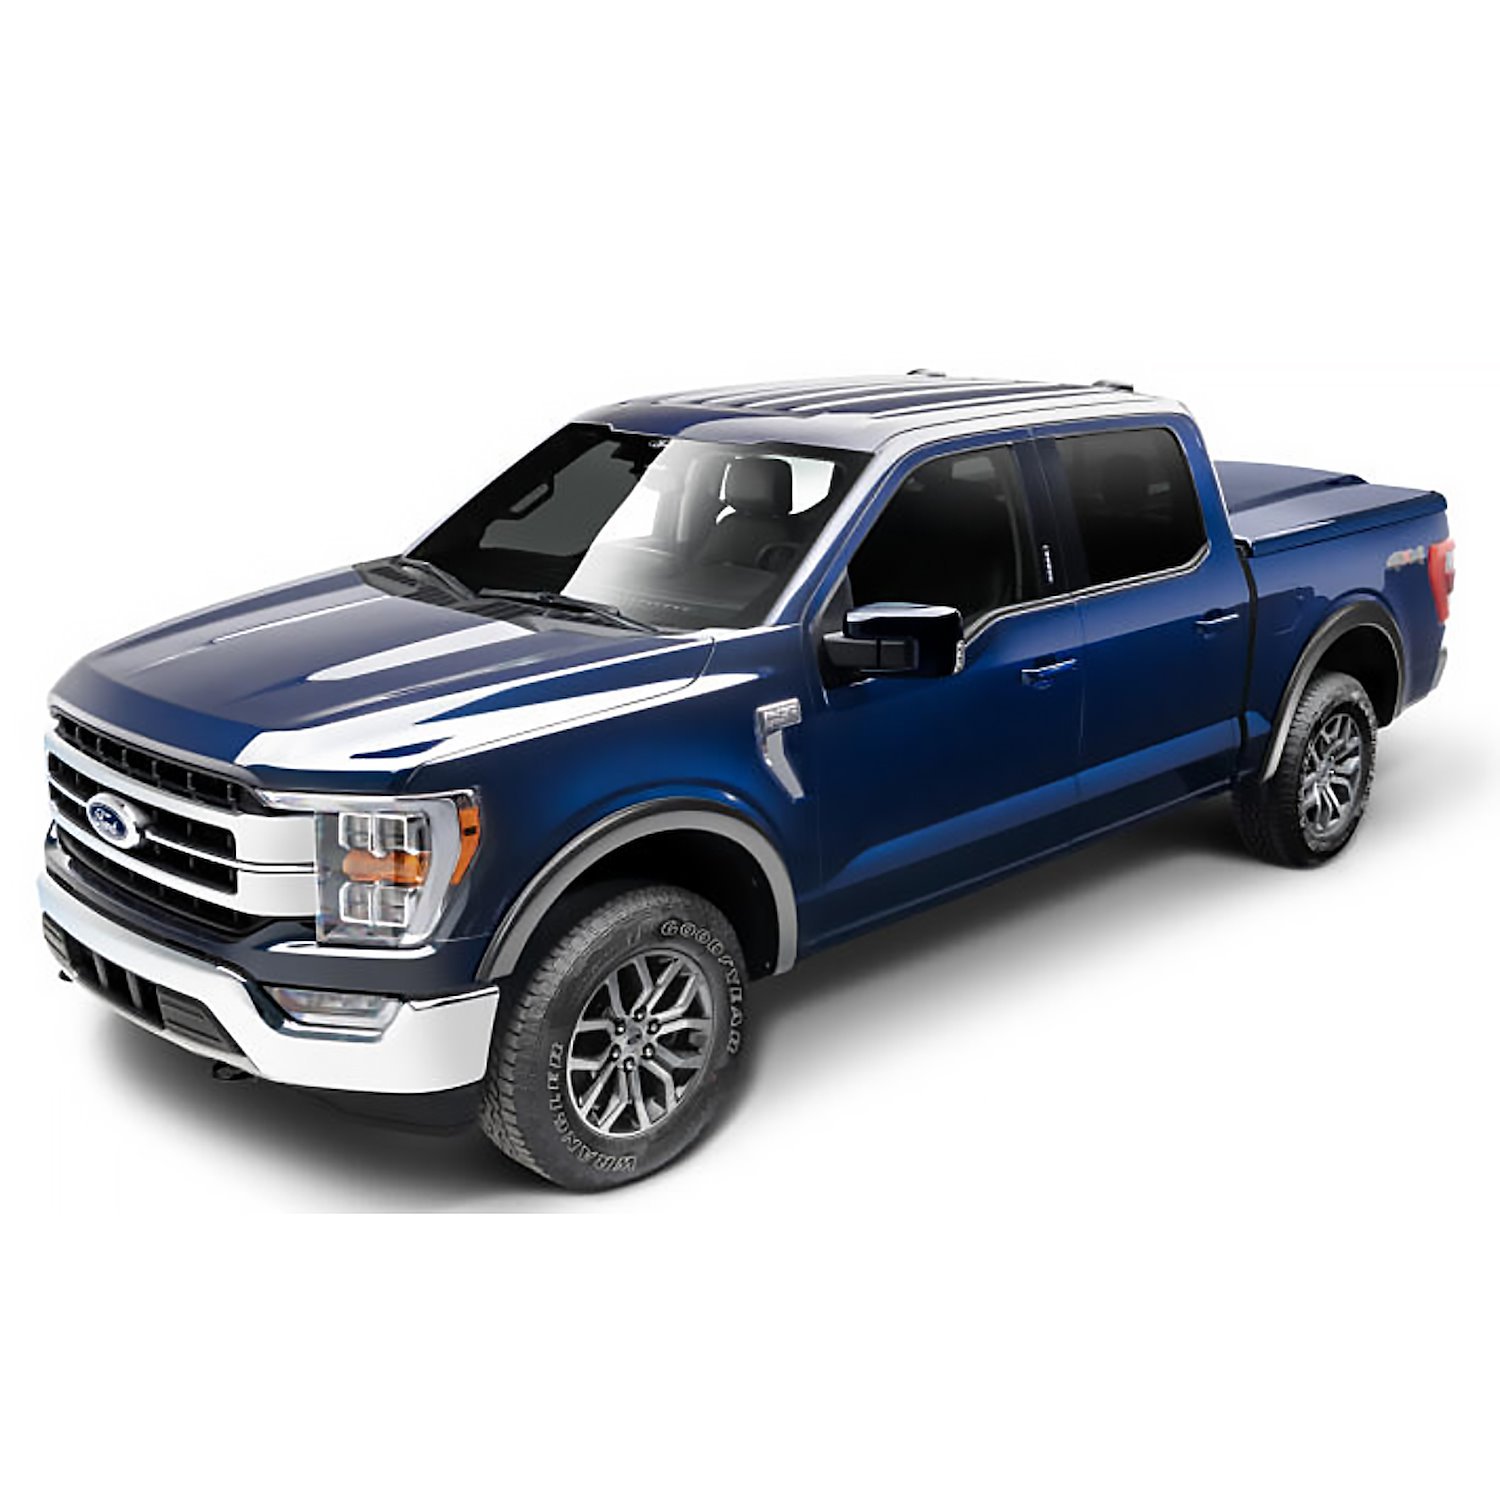 OE-Style Front & Rear Fender Flares for Select Ford F-150 Trucks - Matte Black Smooth Finish